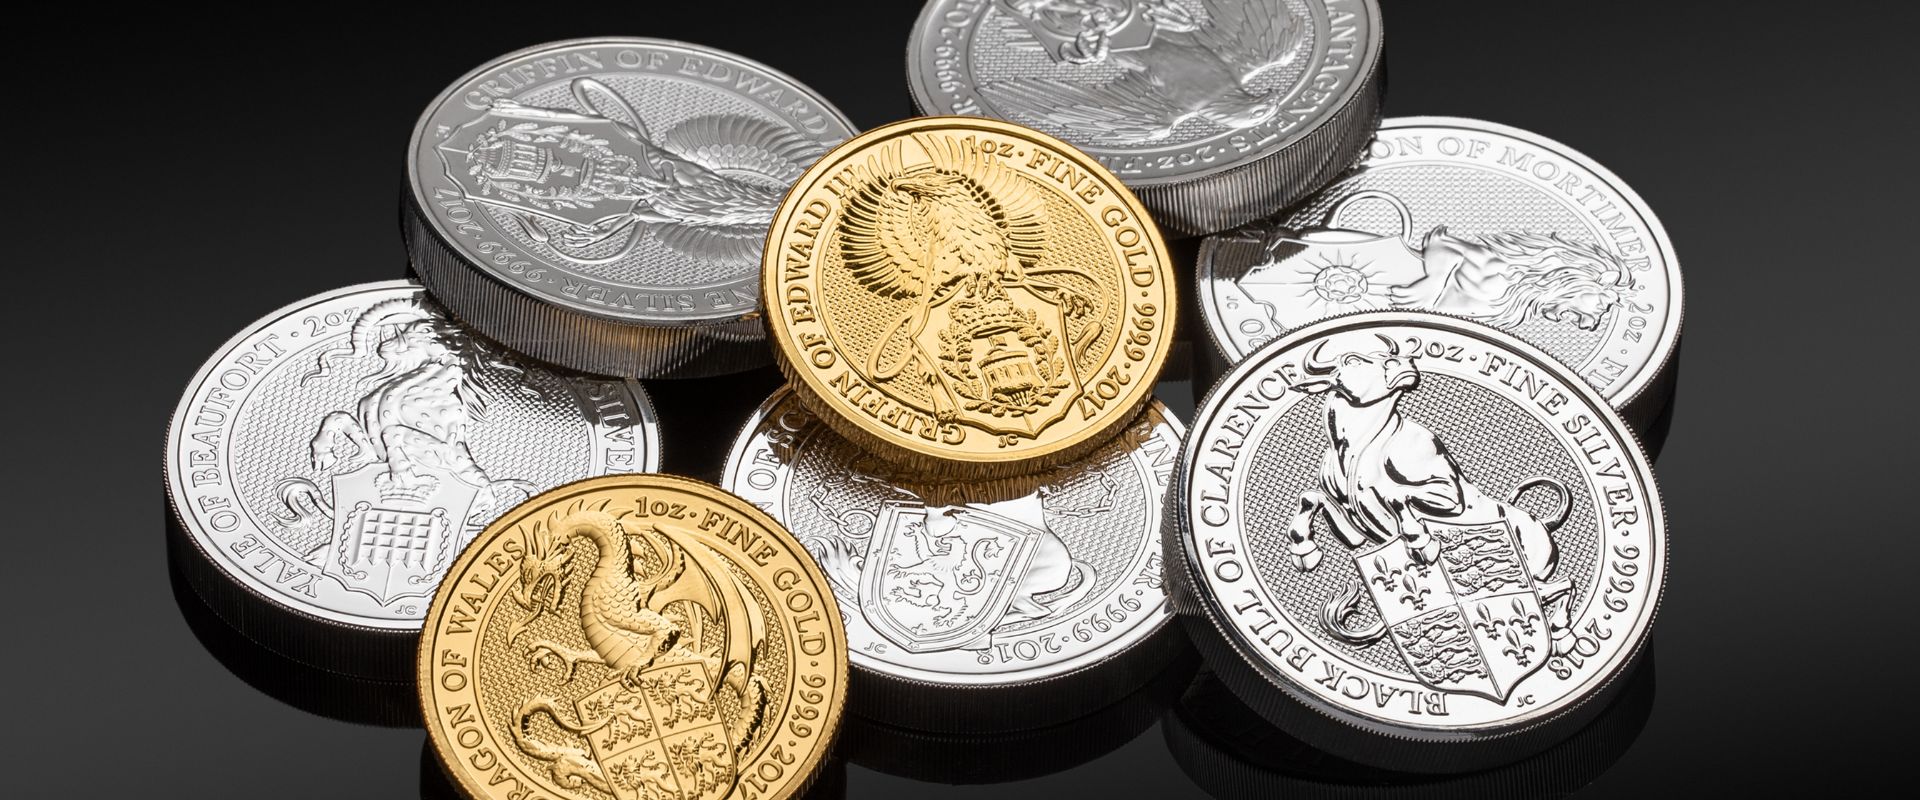 silver and gold coins with a black background